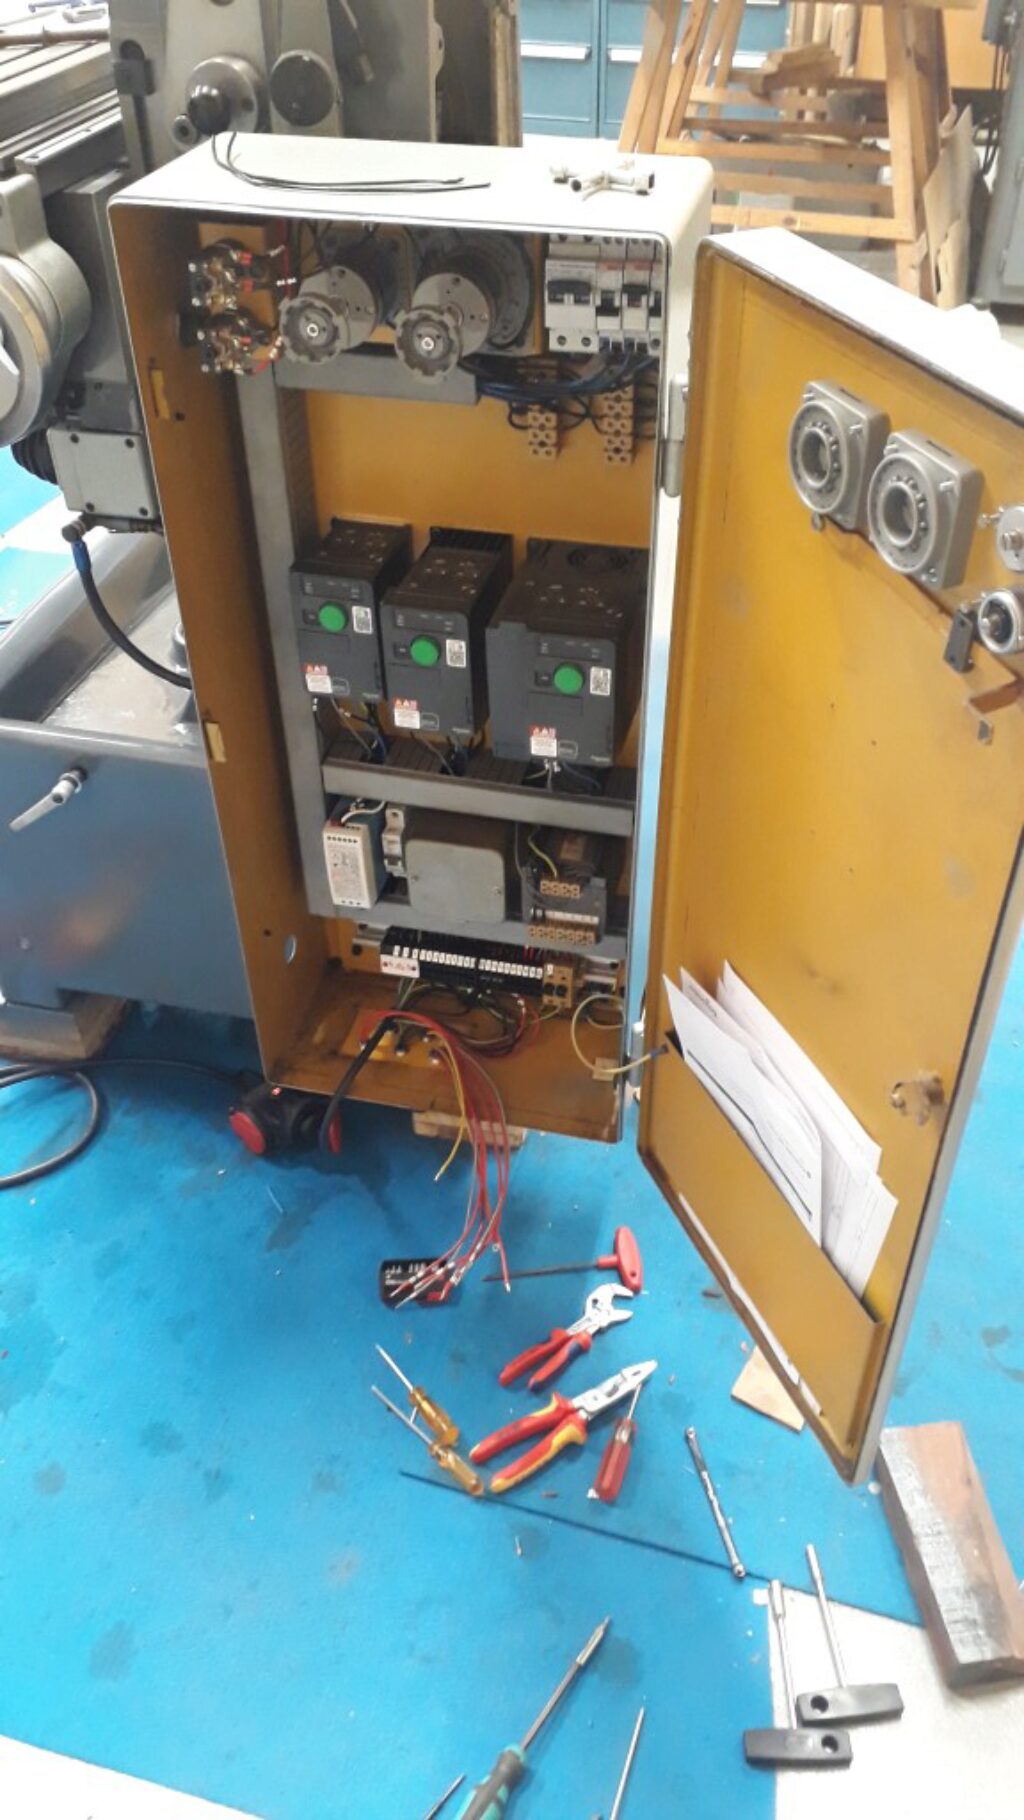 Finishing the connection of the motors in the cabinet